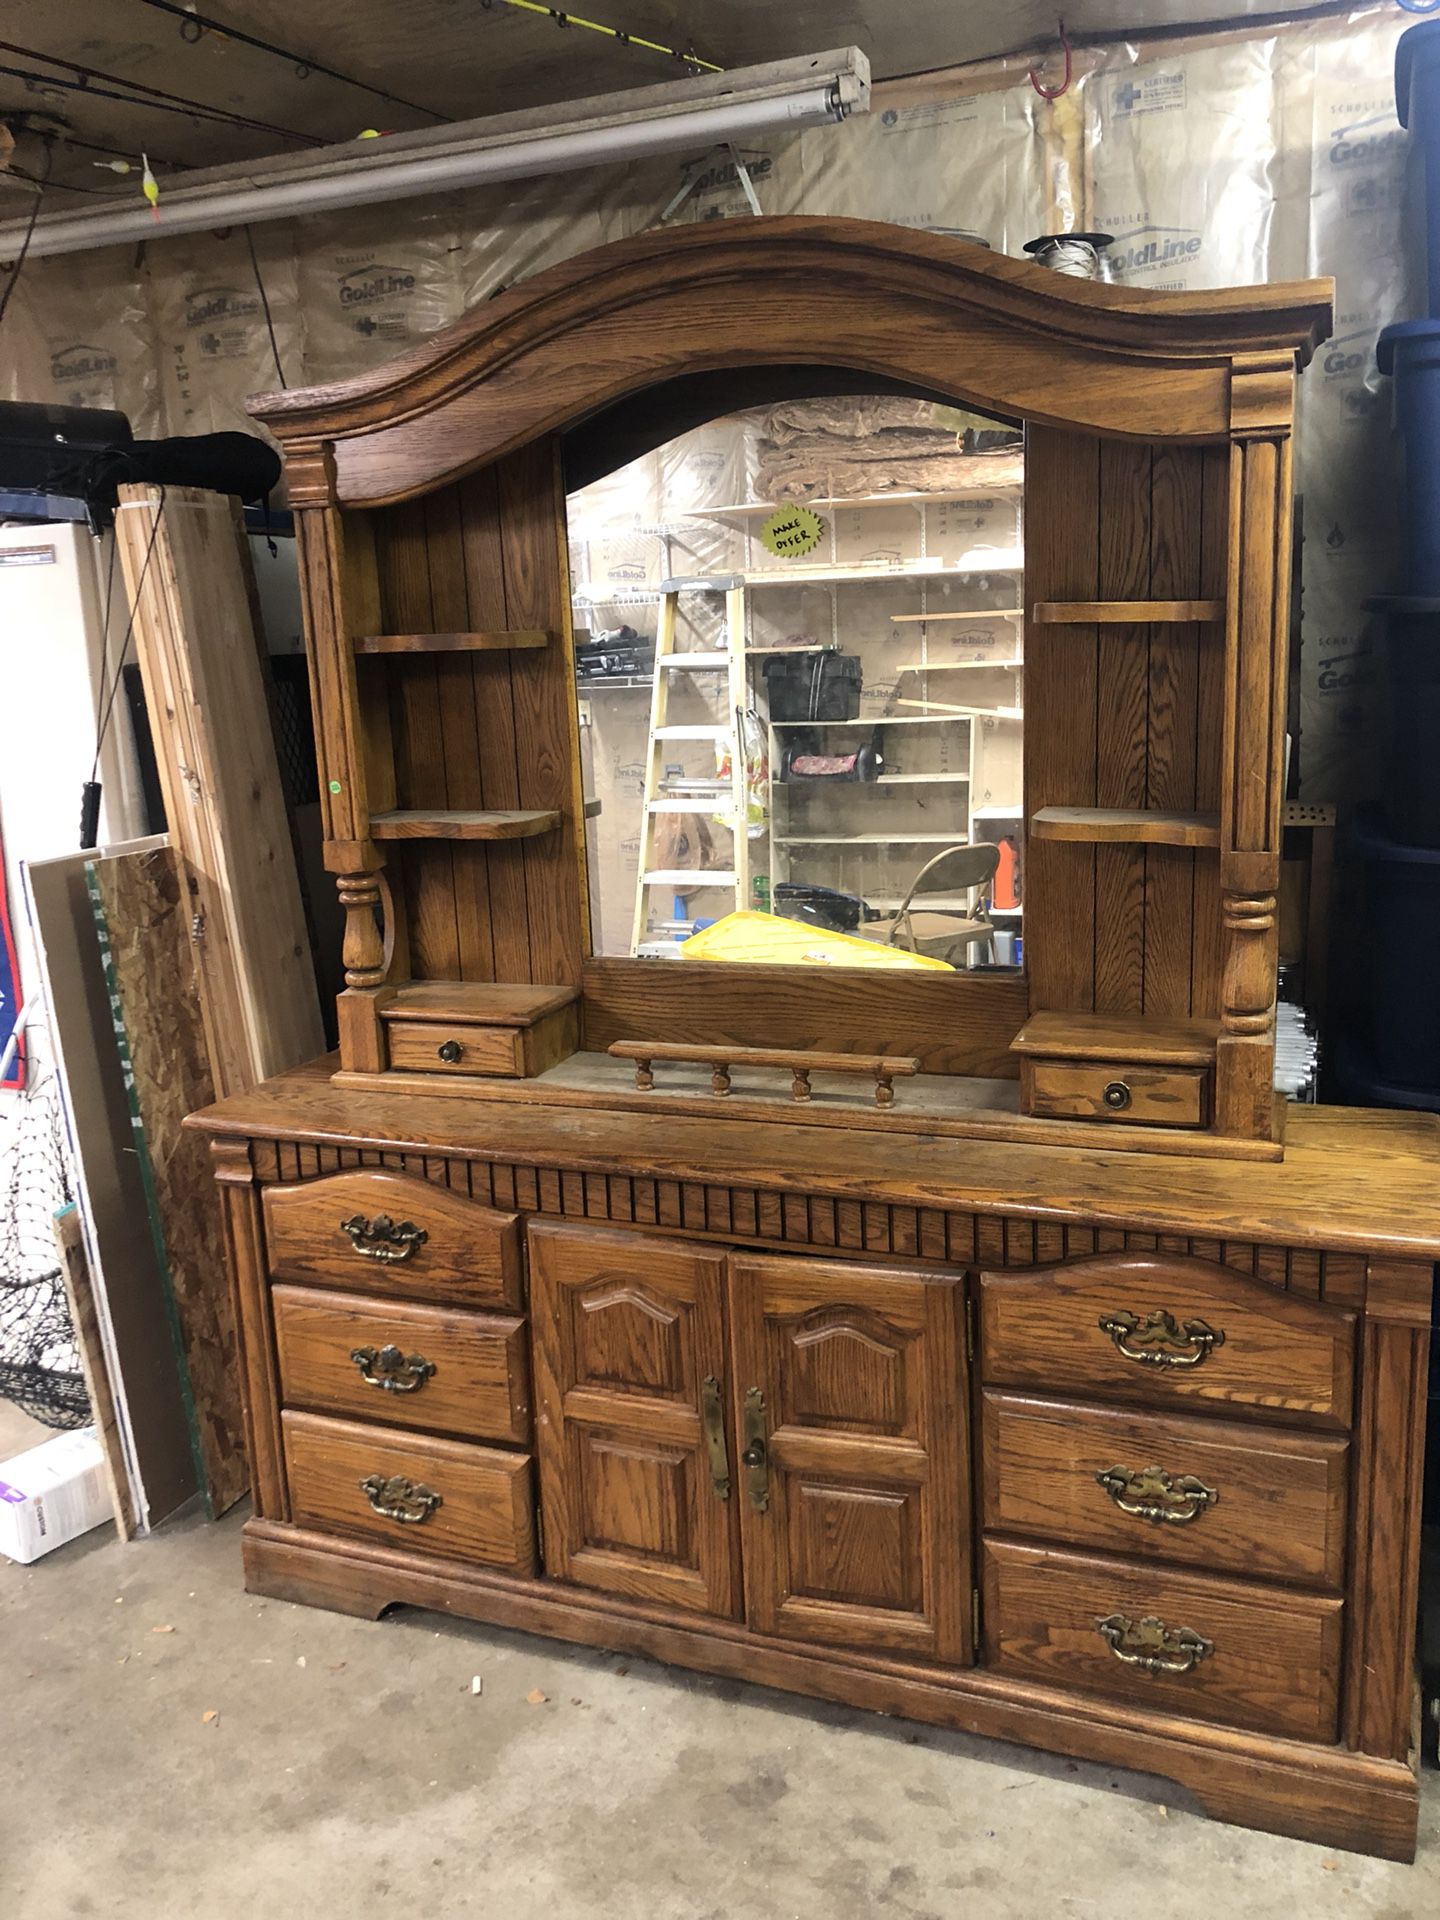 Large dresser with mirror